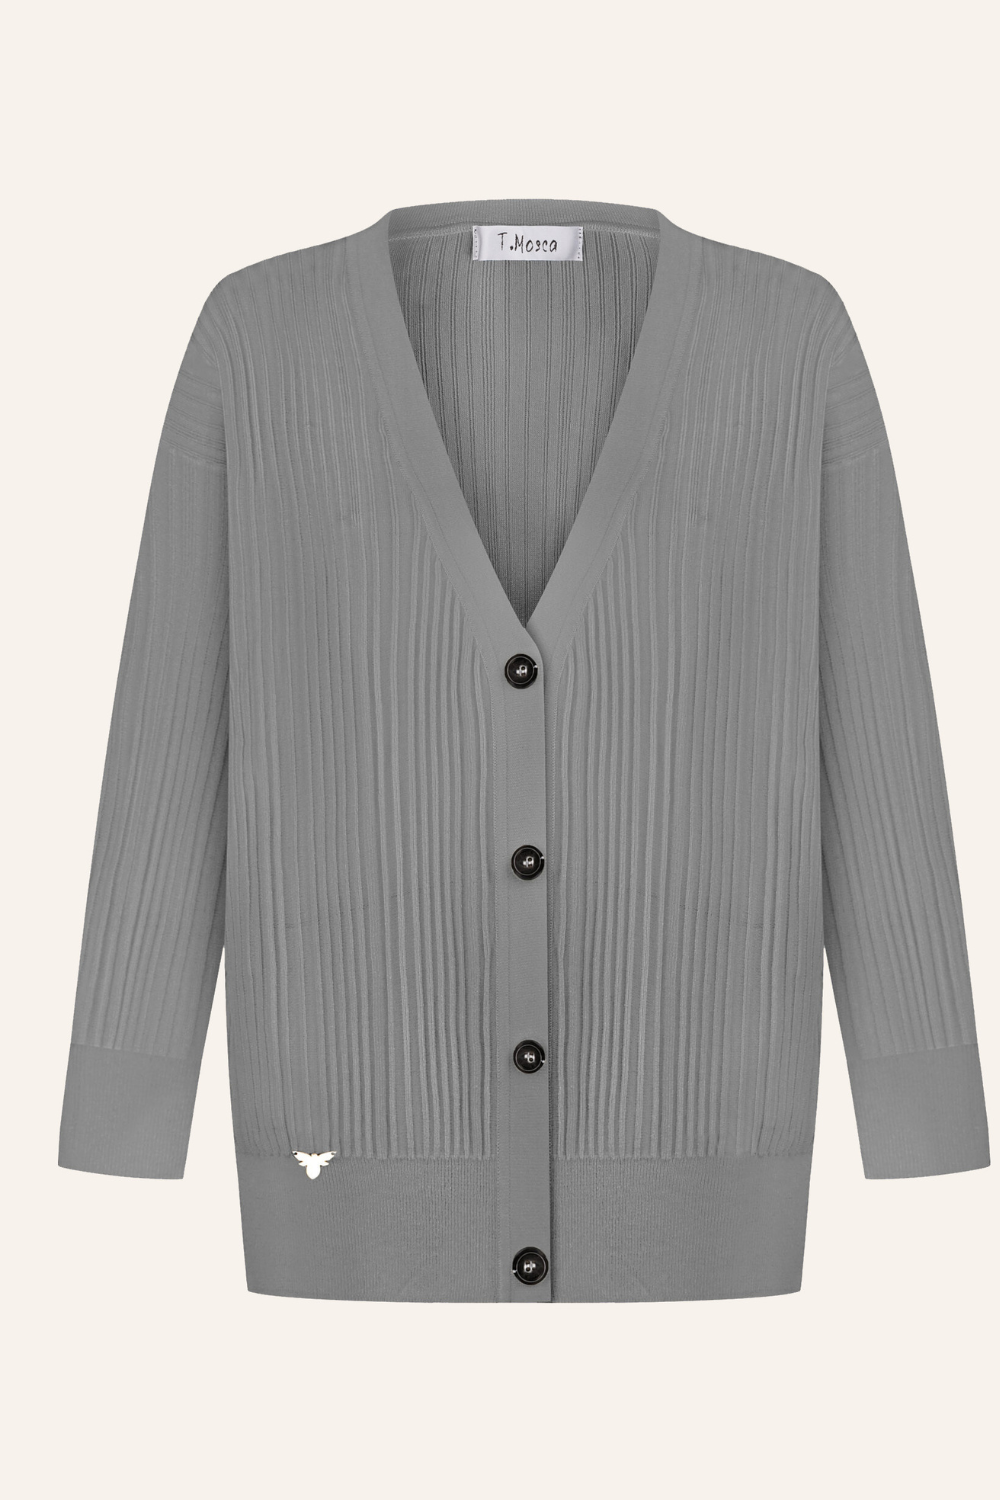 Knitted cardigan, gray, (T.Mosca), GOL24-04